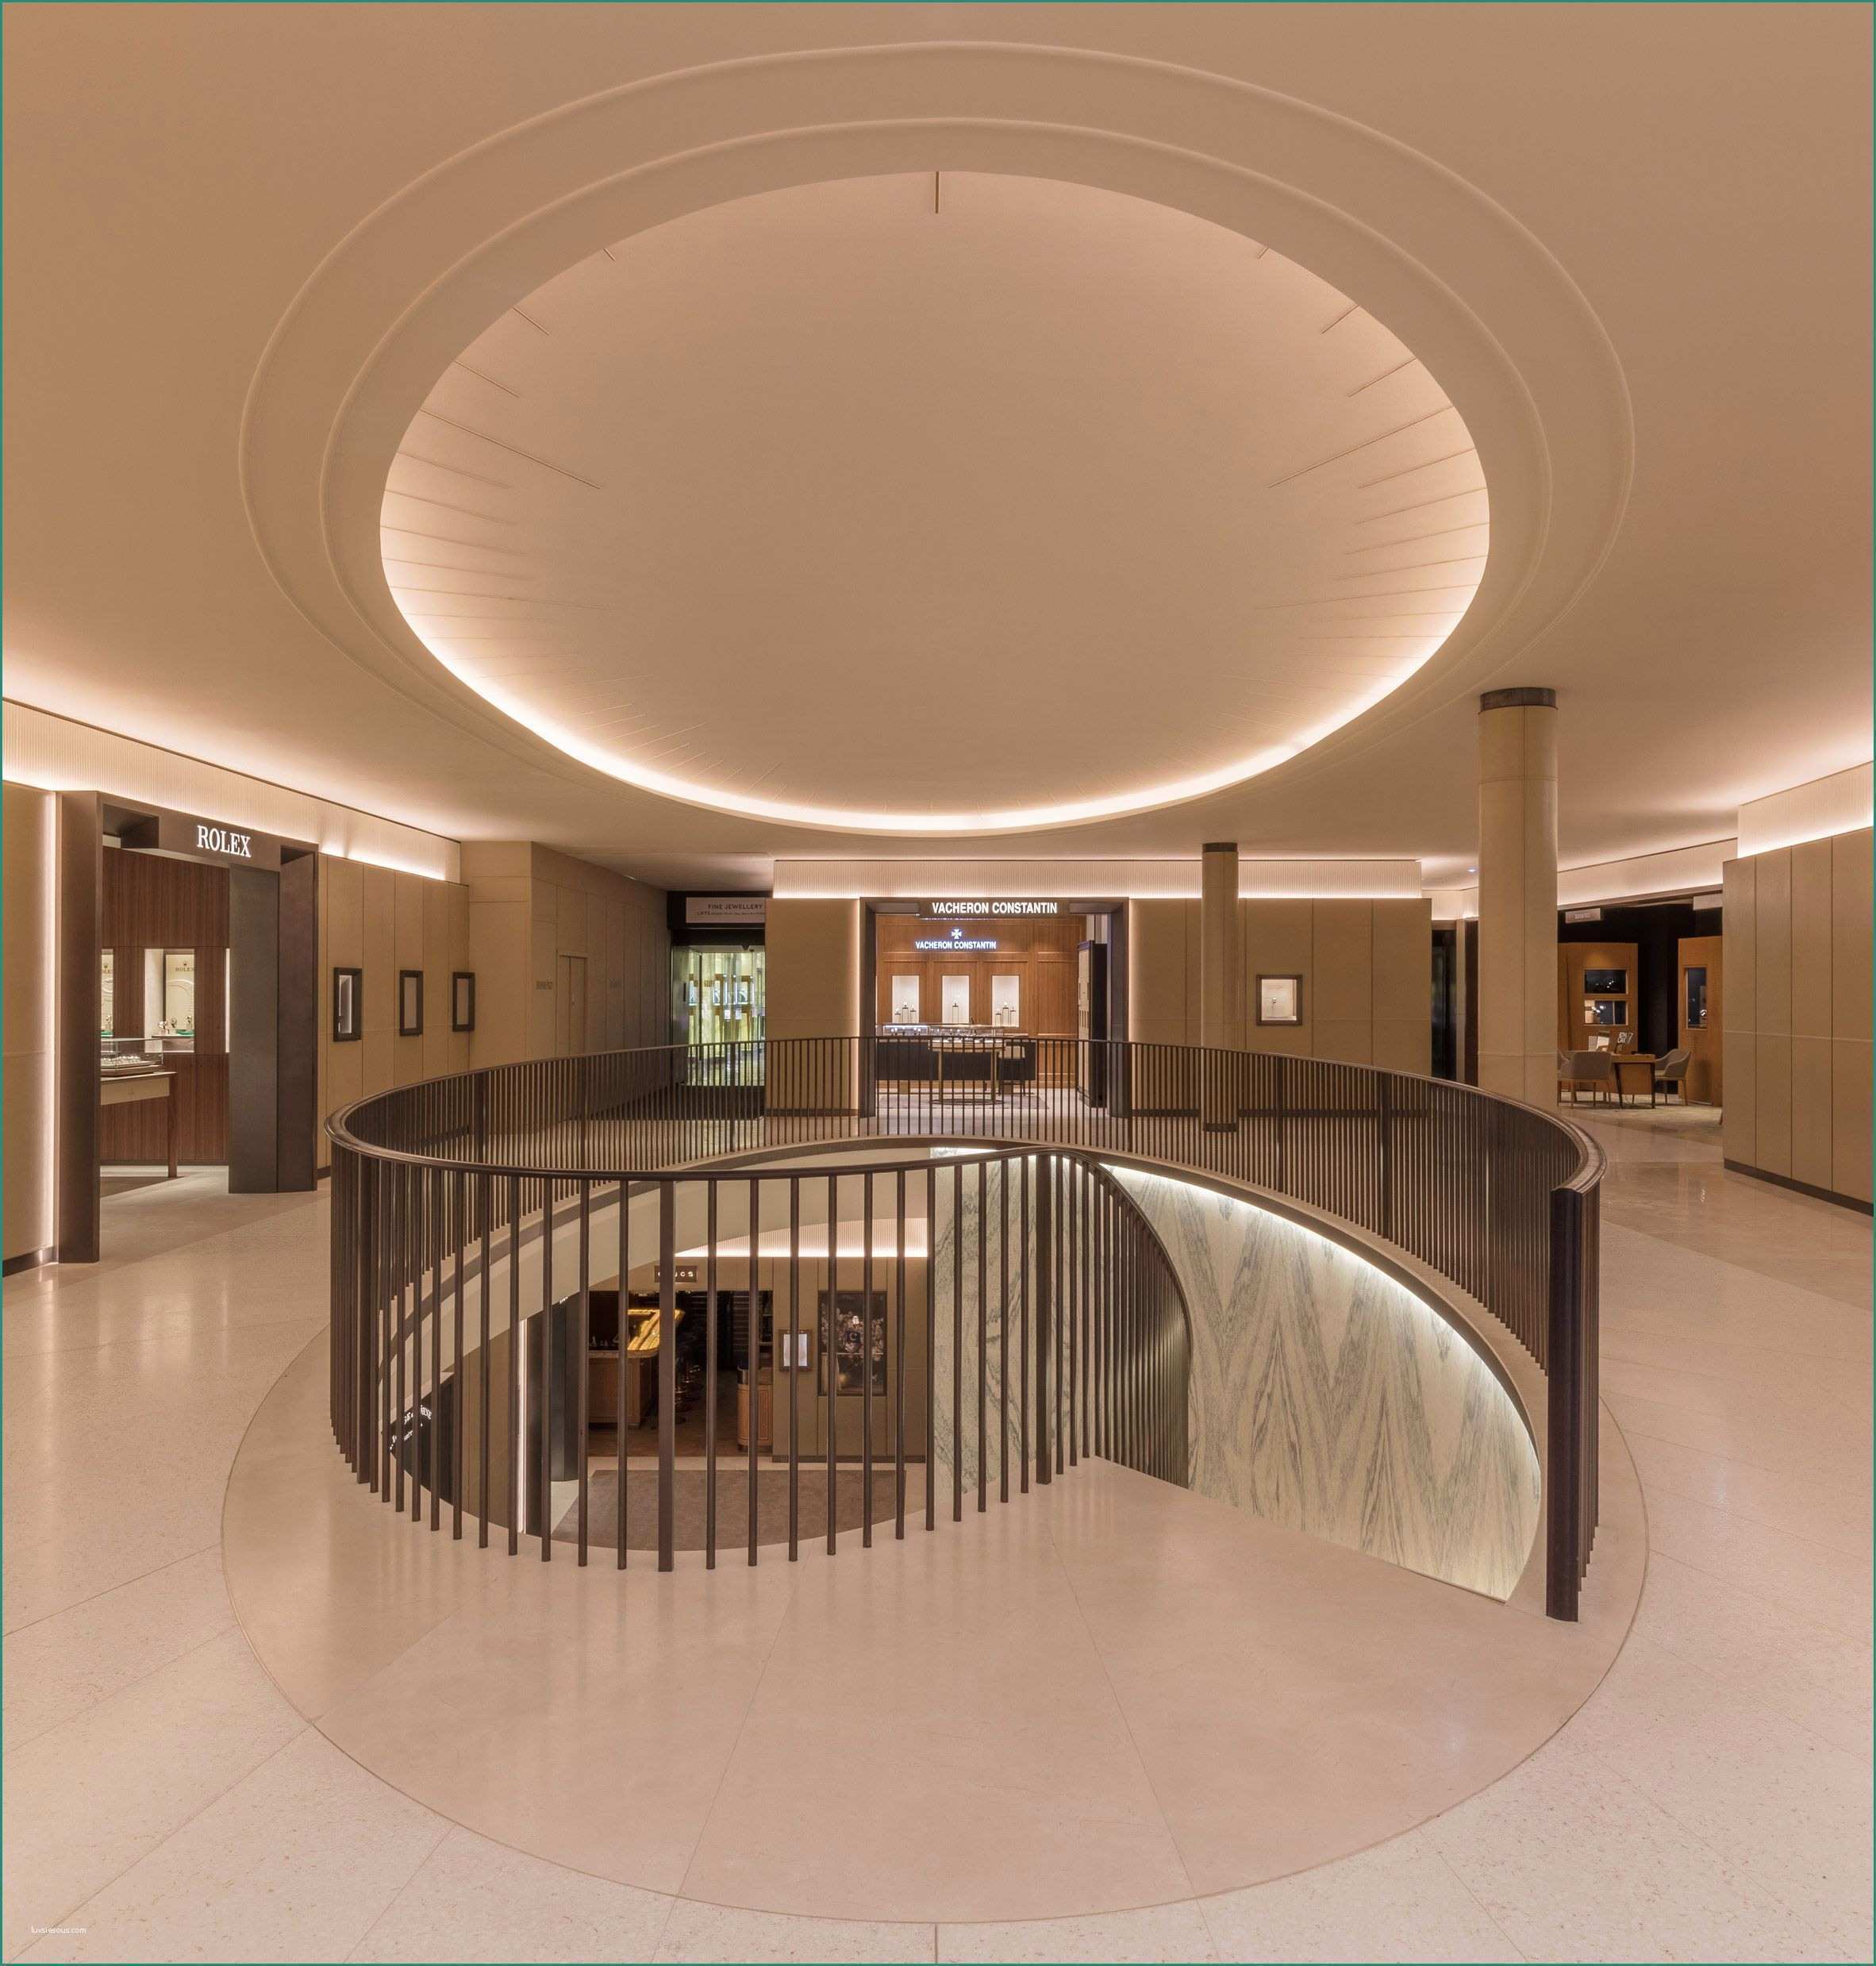 Ringhiere Esterne Moderne E Harrods Fine Watches Department by Rundell associates Arq